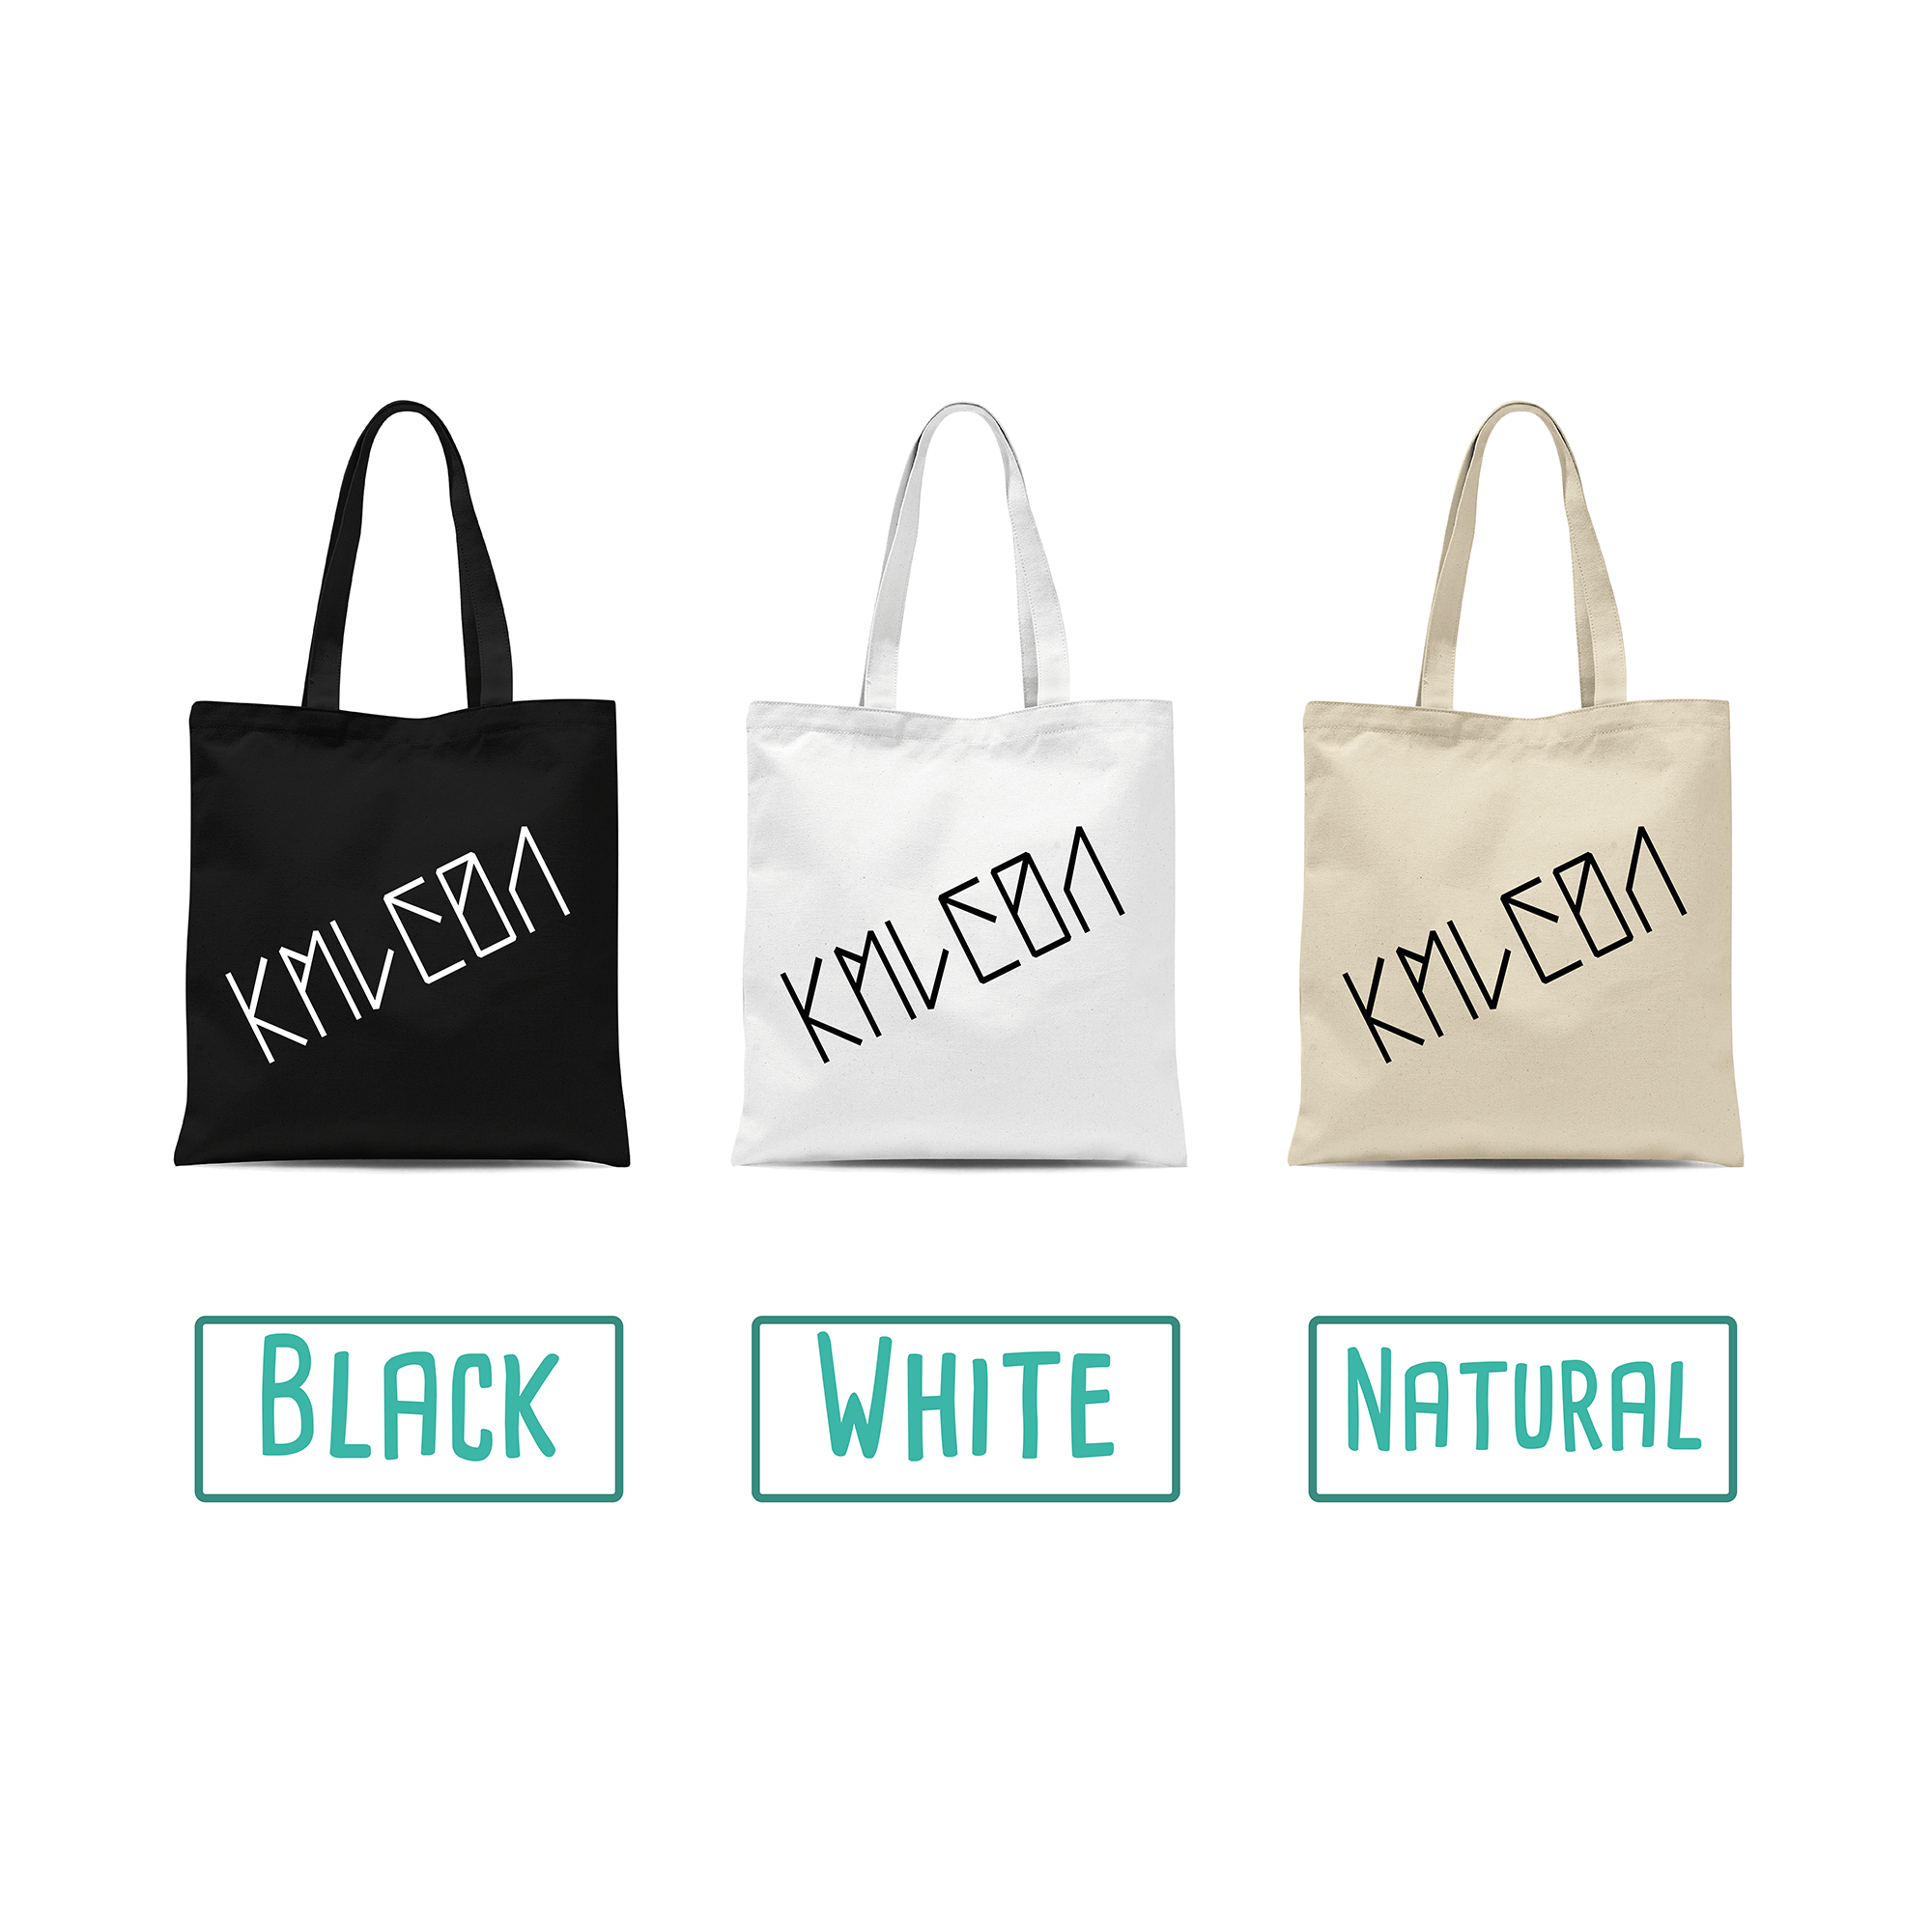 'Adult mode off' tote bag